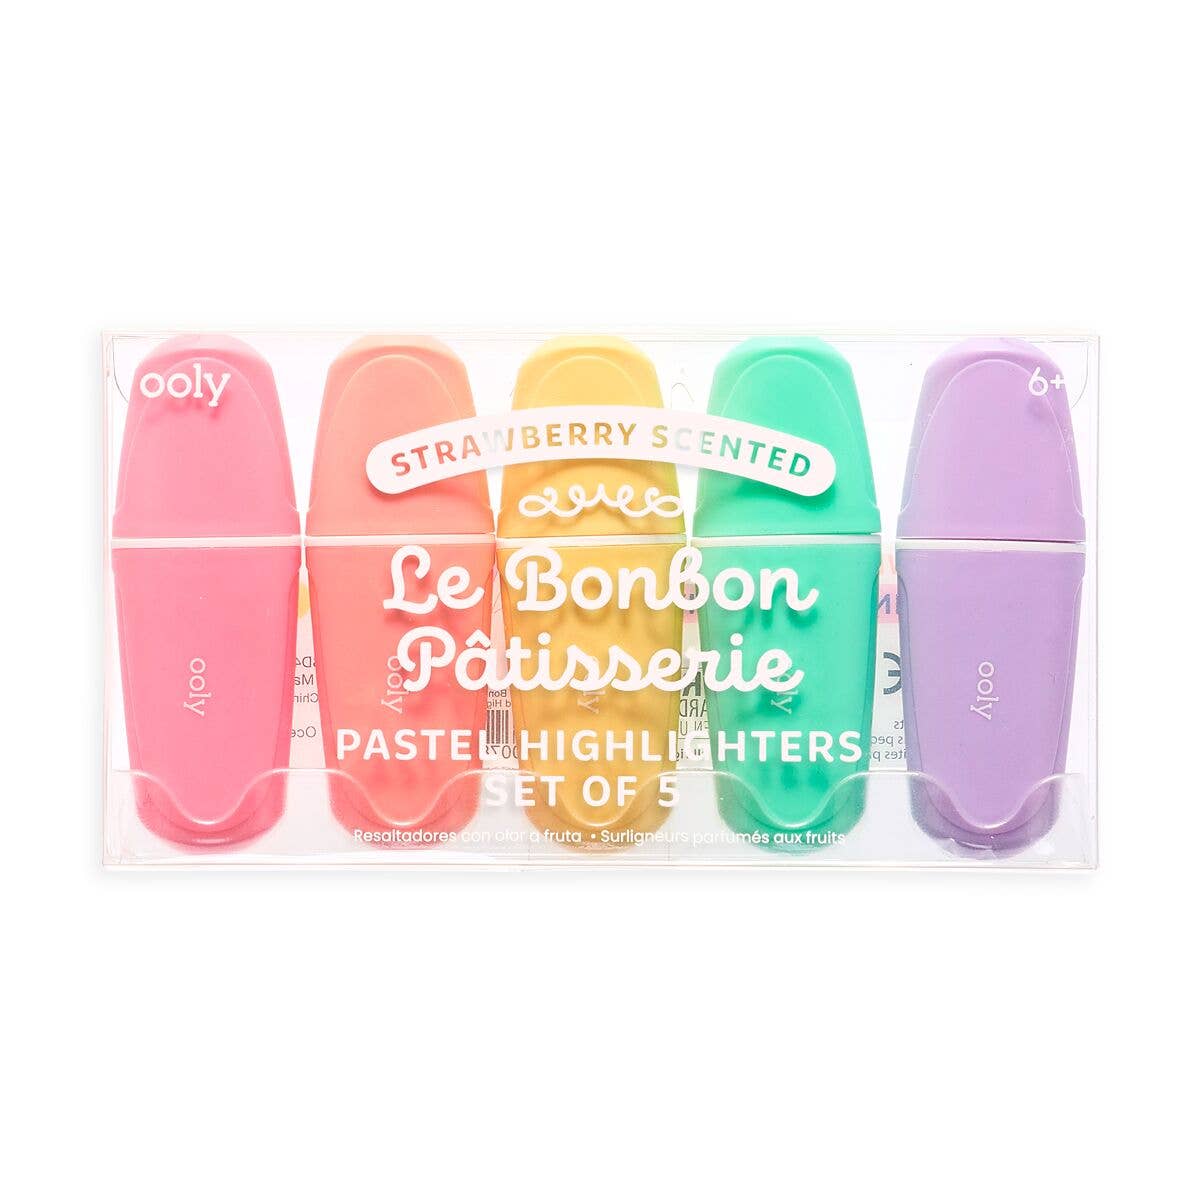 Le Bon Bon Patisserie Strawberry-Scented Highlighters